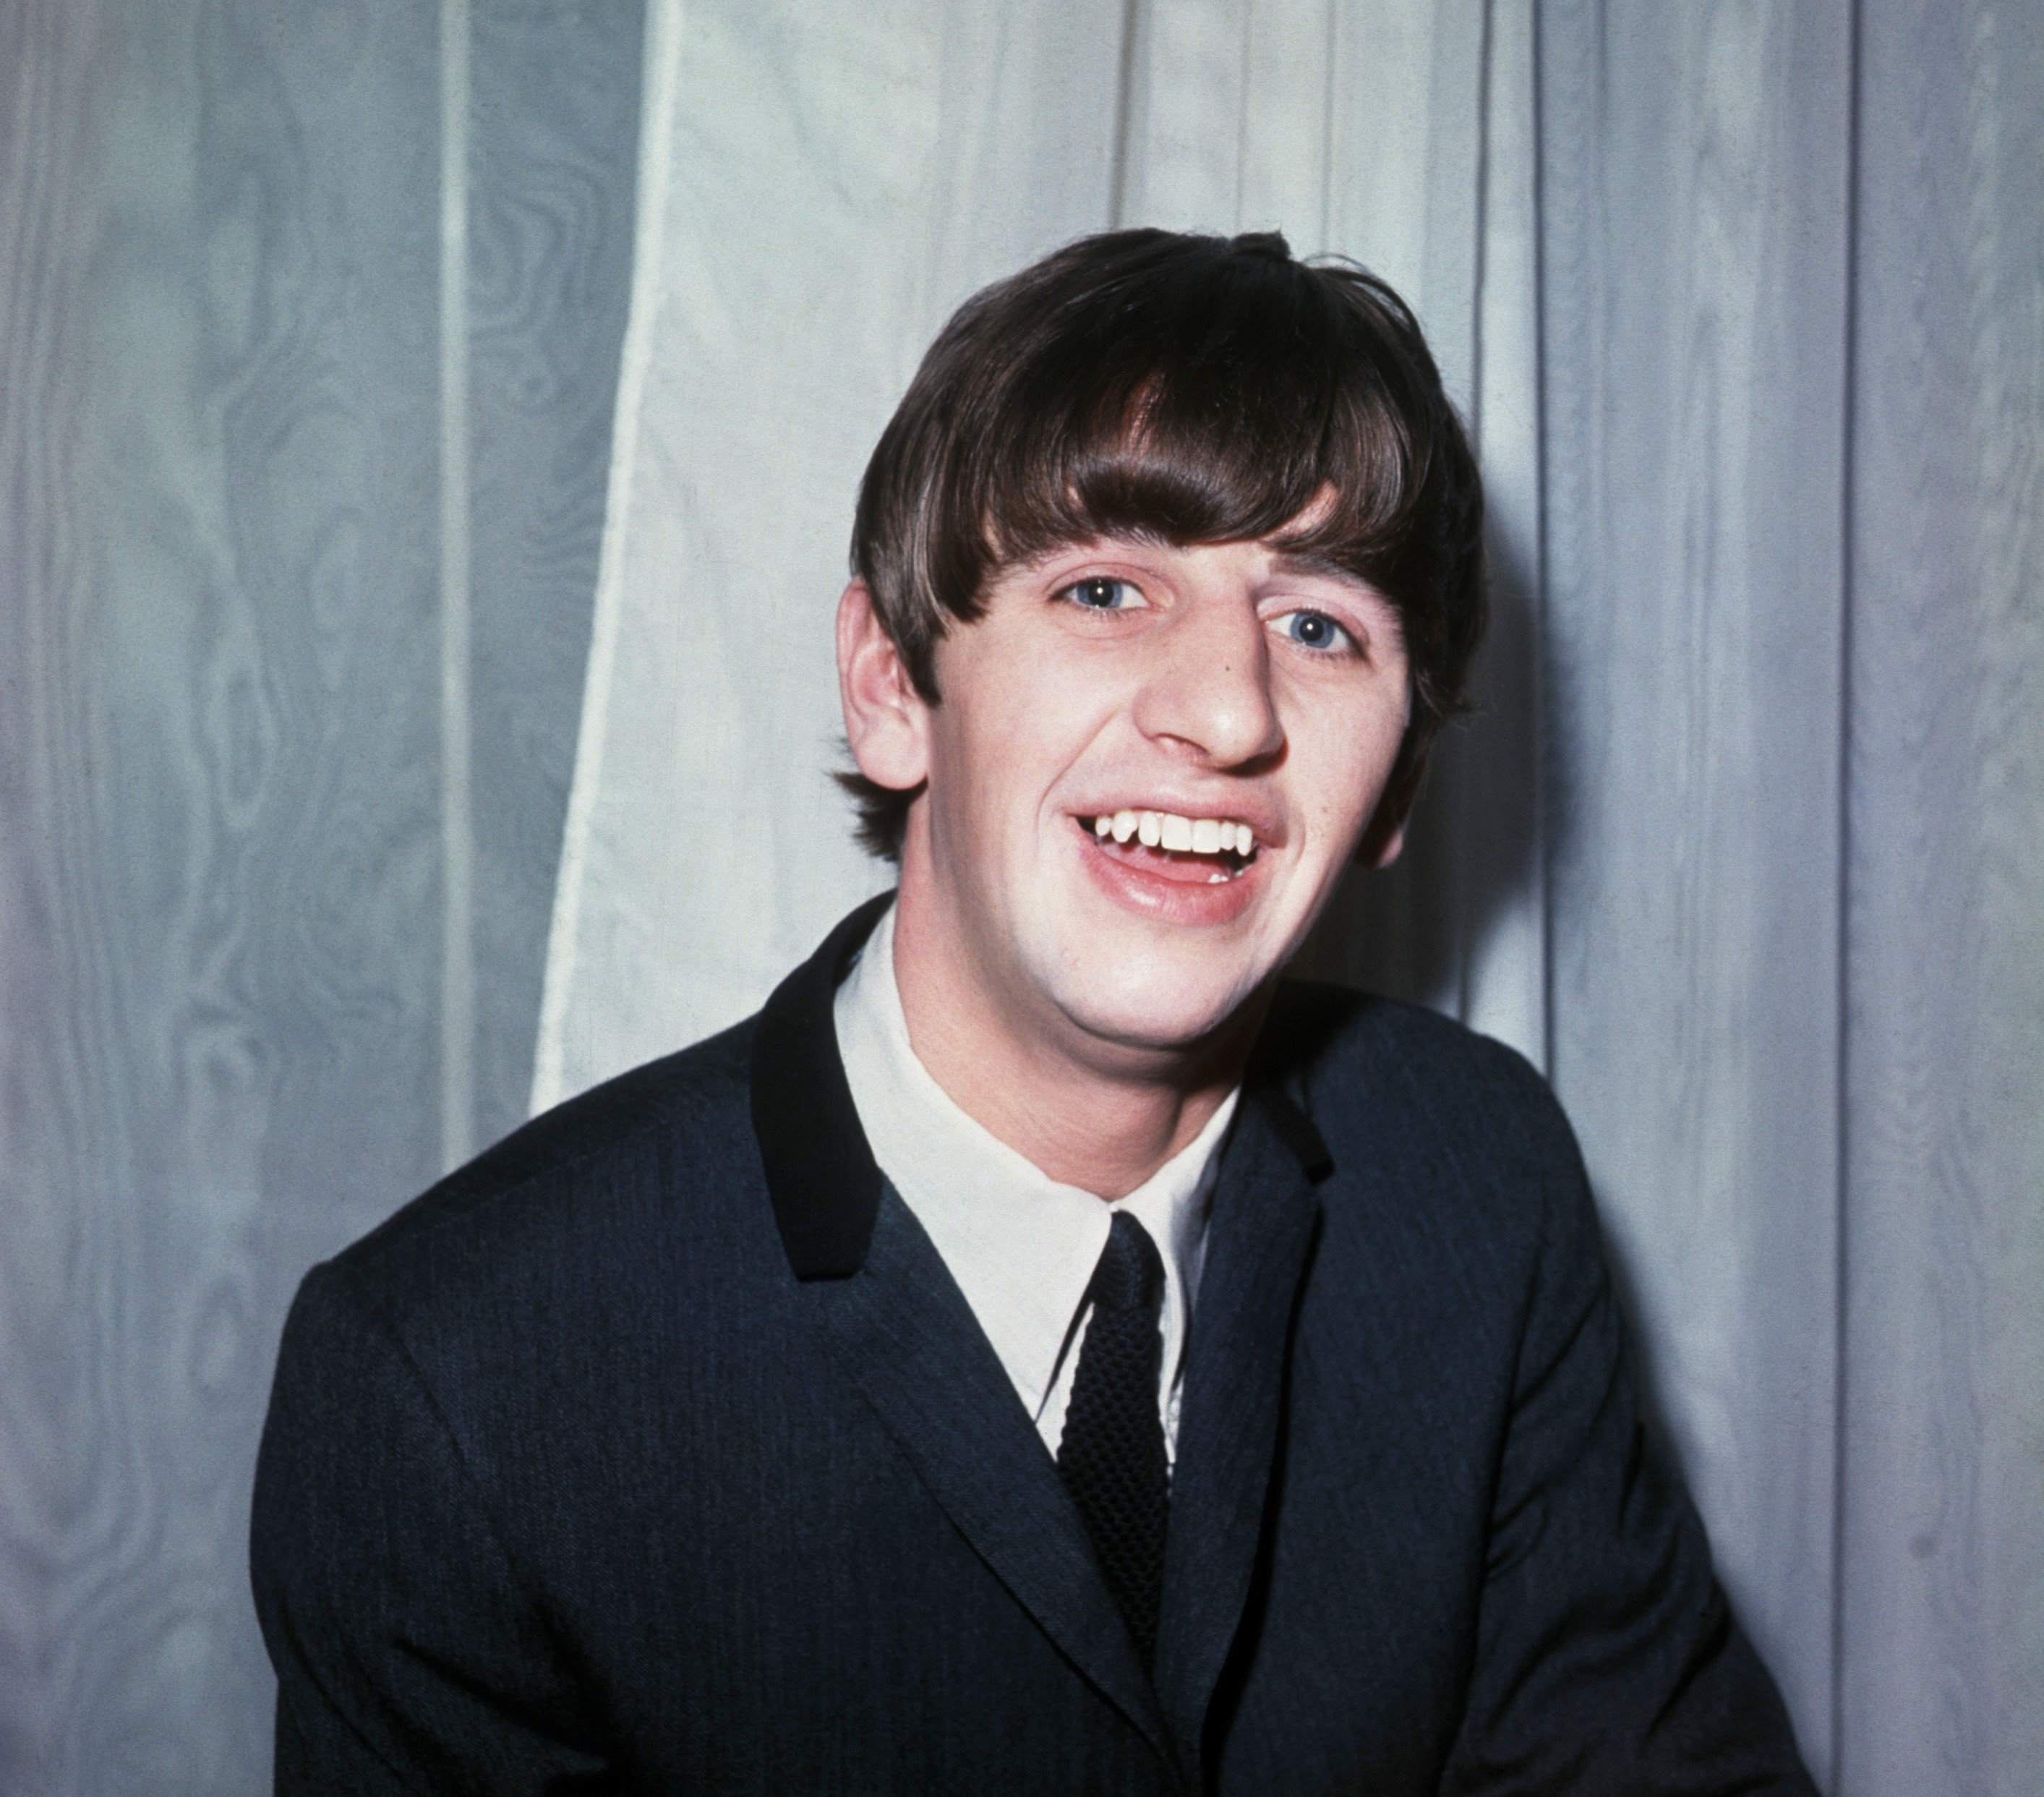 Ringo Starr wears a suit and sits in front of a gray background.